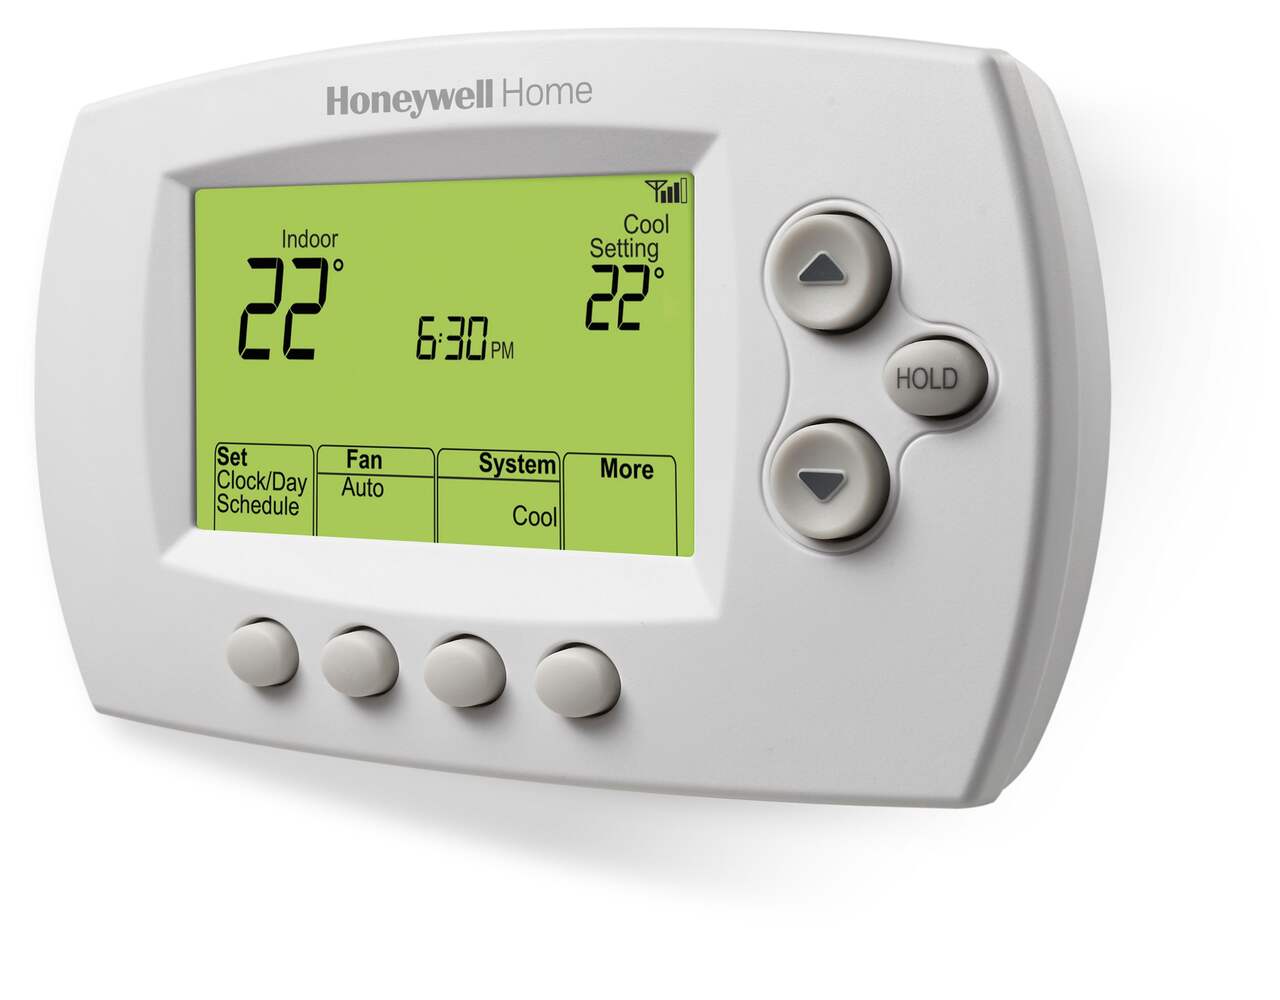 Where Is The Auto Control On Honeywell Wifi Smart Thermostat